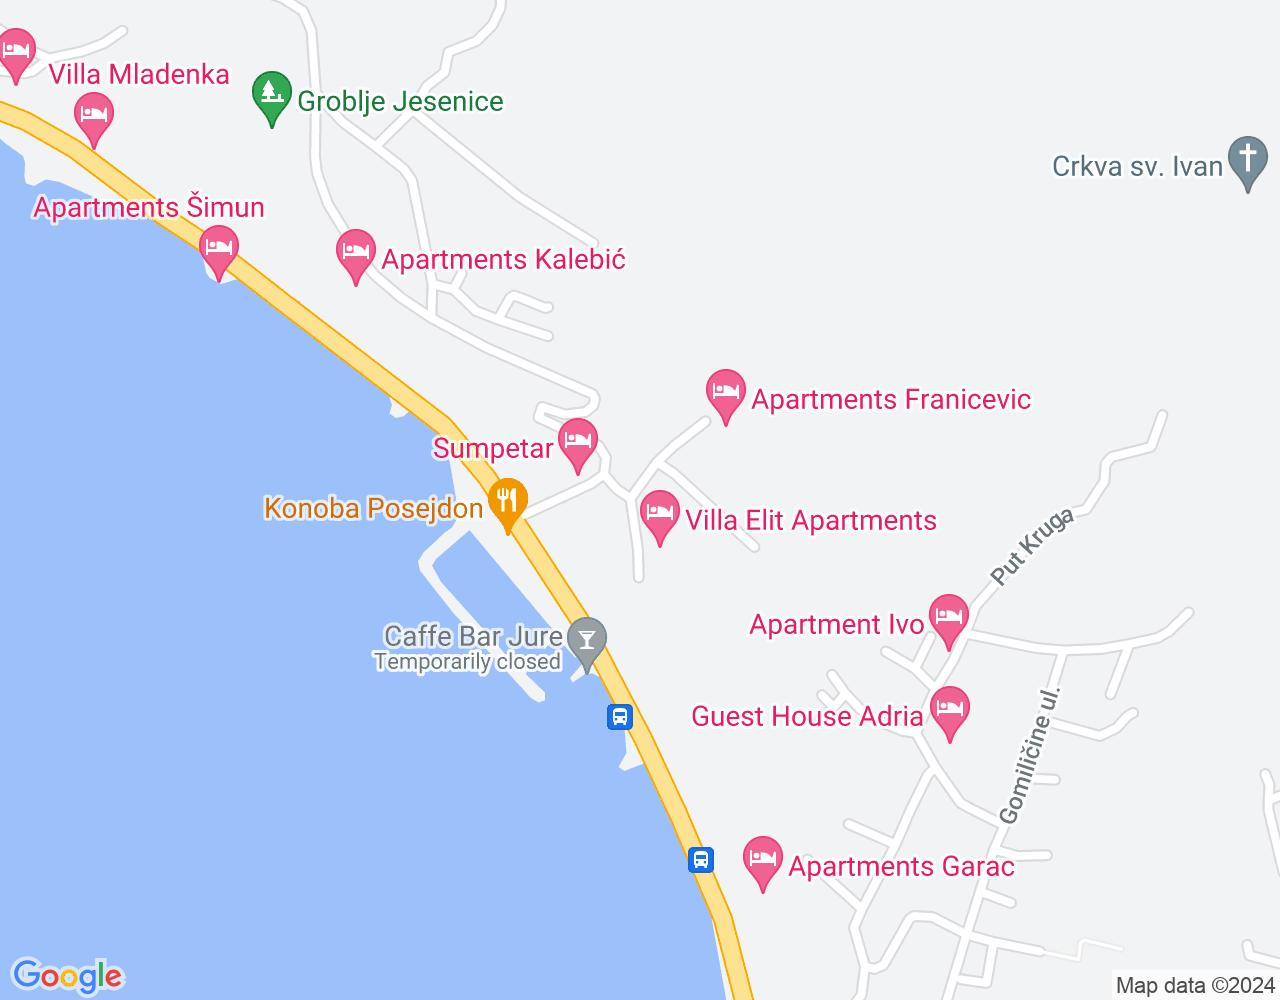 Nearby it is possible to find bars and restaurants, grocery stores, bakeries and beaches. Everything is on walking distance. - 43.45134403 16.62744985